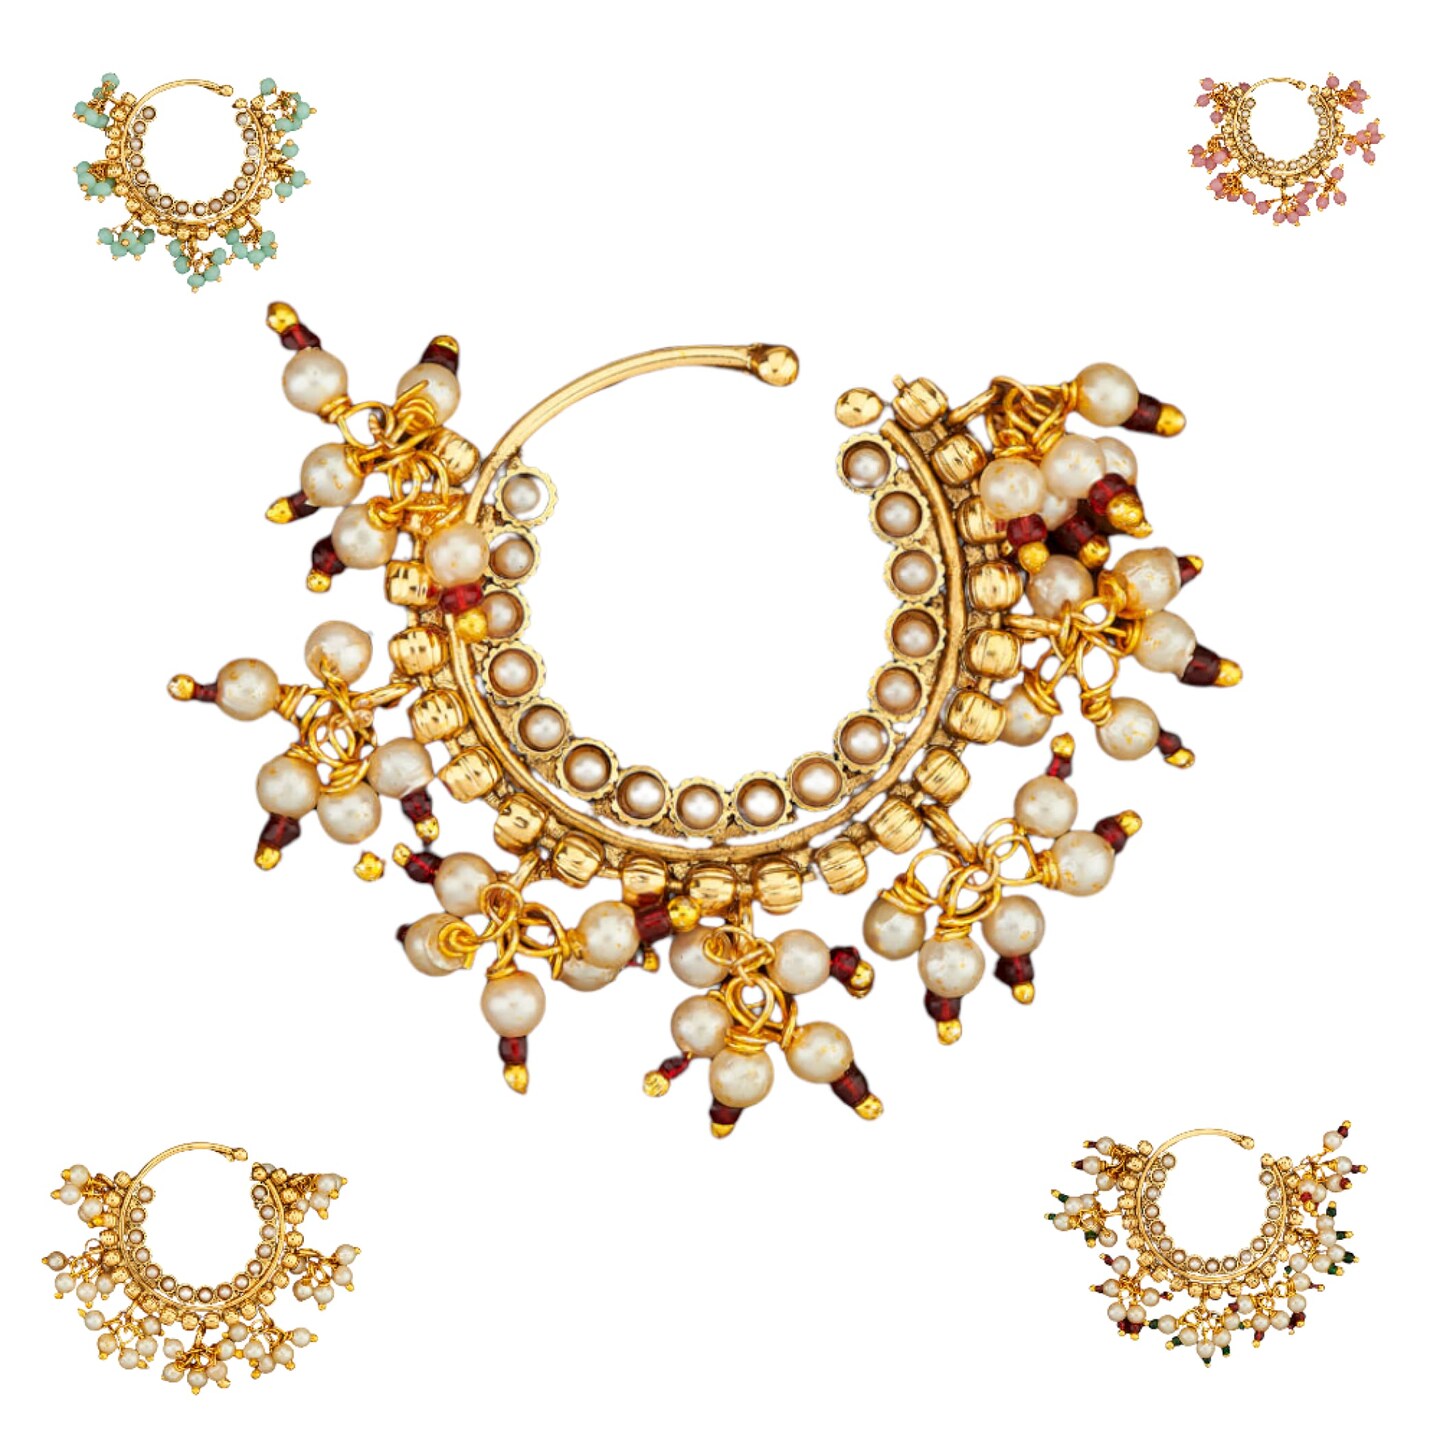 Antique traditional nose ring 14423 — vrddhi fashion jewellery